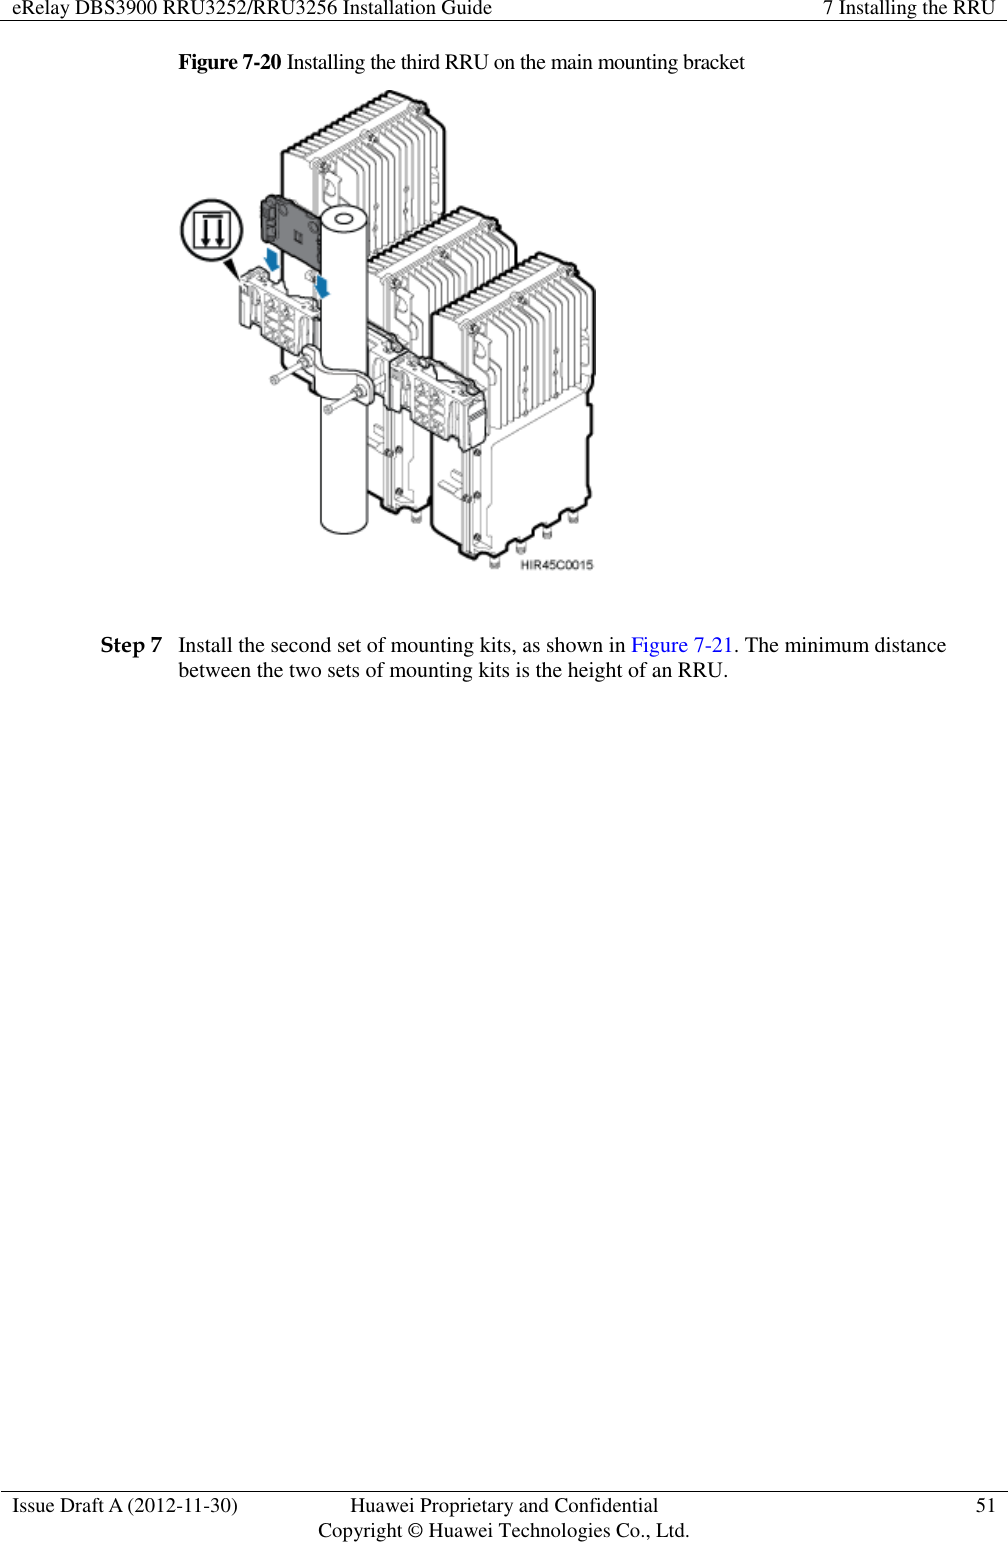 eRelay DBS3900 RRU3252/RRU3256 Installation Guide 7 Installing the RRU  Issue Draft A (2012-11-30) Huawei Proprietary and Confidential                                     Copyright © Huawei Technologies Co., Ltd. 51  Figure 7-20 Installing the third RRU on the main mounting bracket   Step 7 Install the second set of mounting kits, as shown in Figure 7-21. The minimum distance between the two sets of mounting kits is the height of an RRU. 